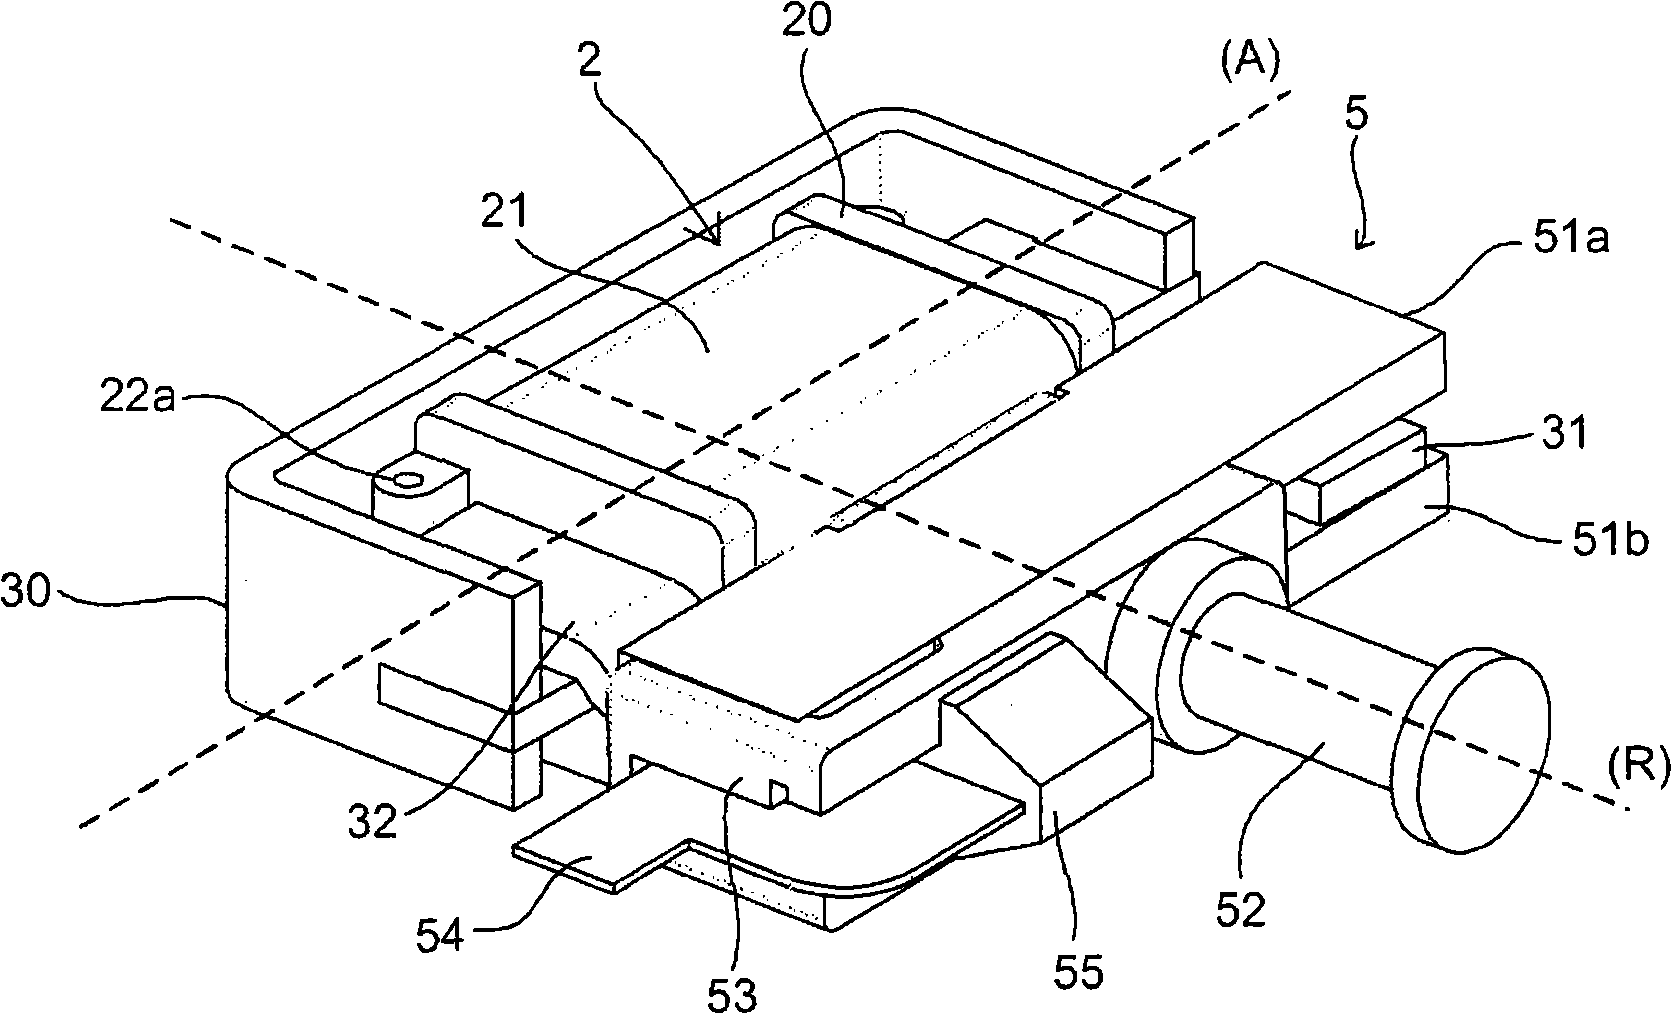 Stand-alone device for generating electrical energy